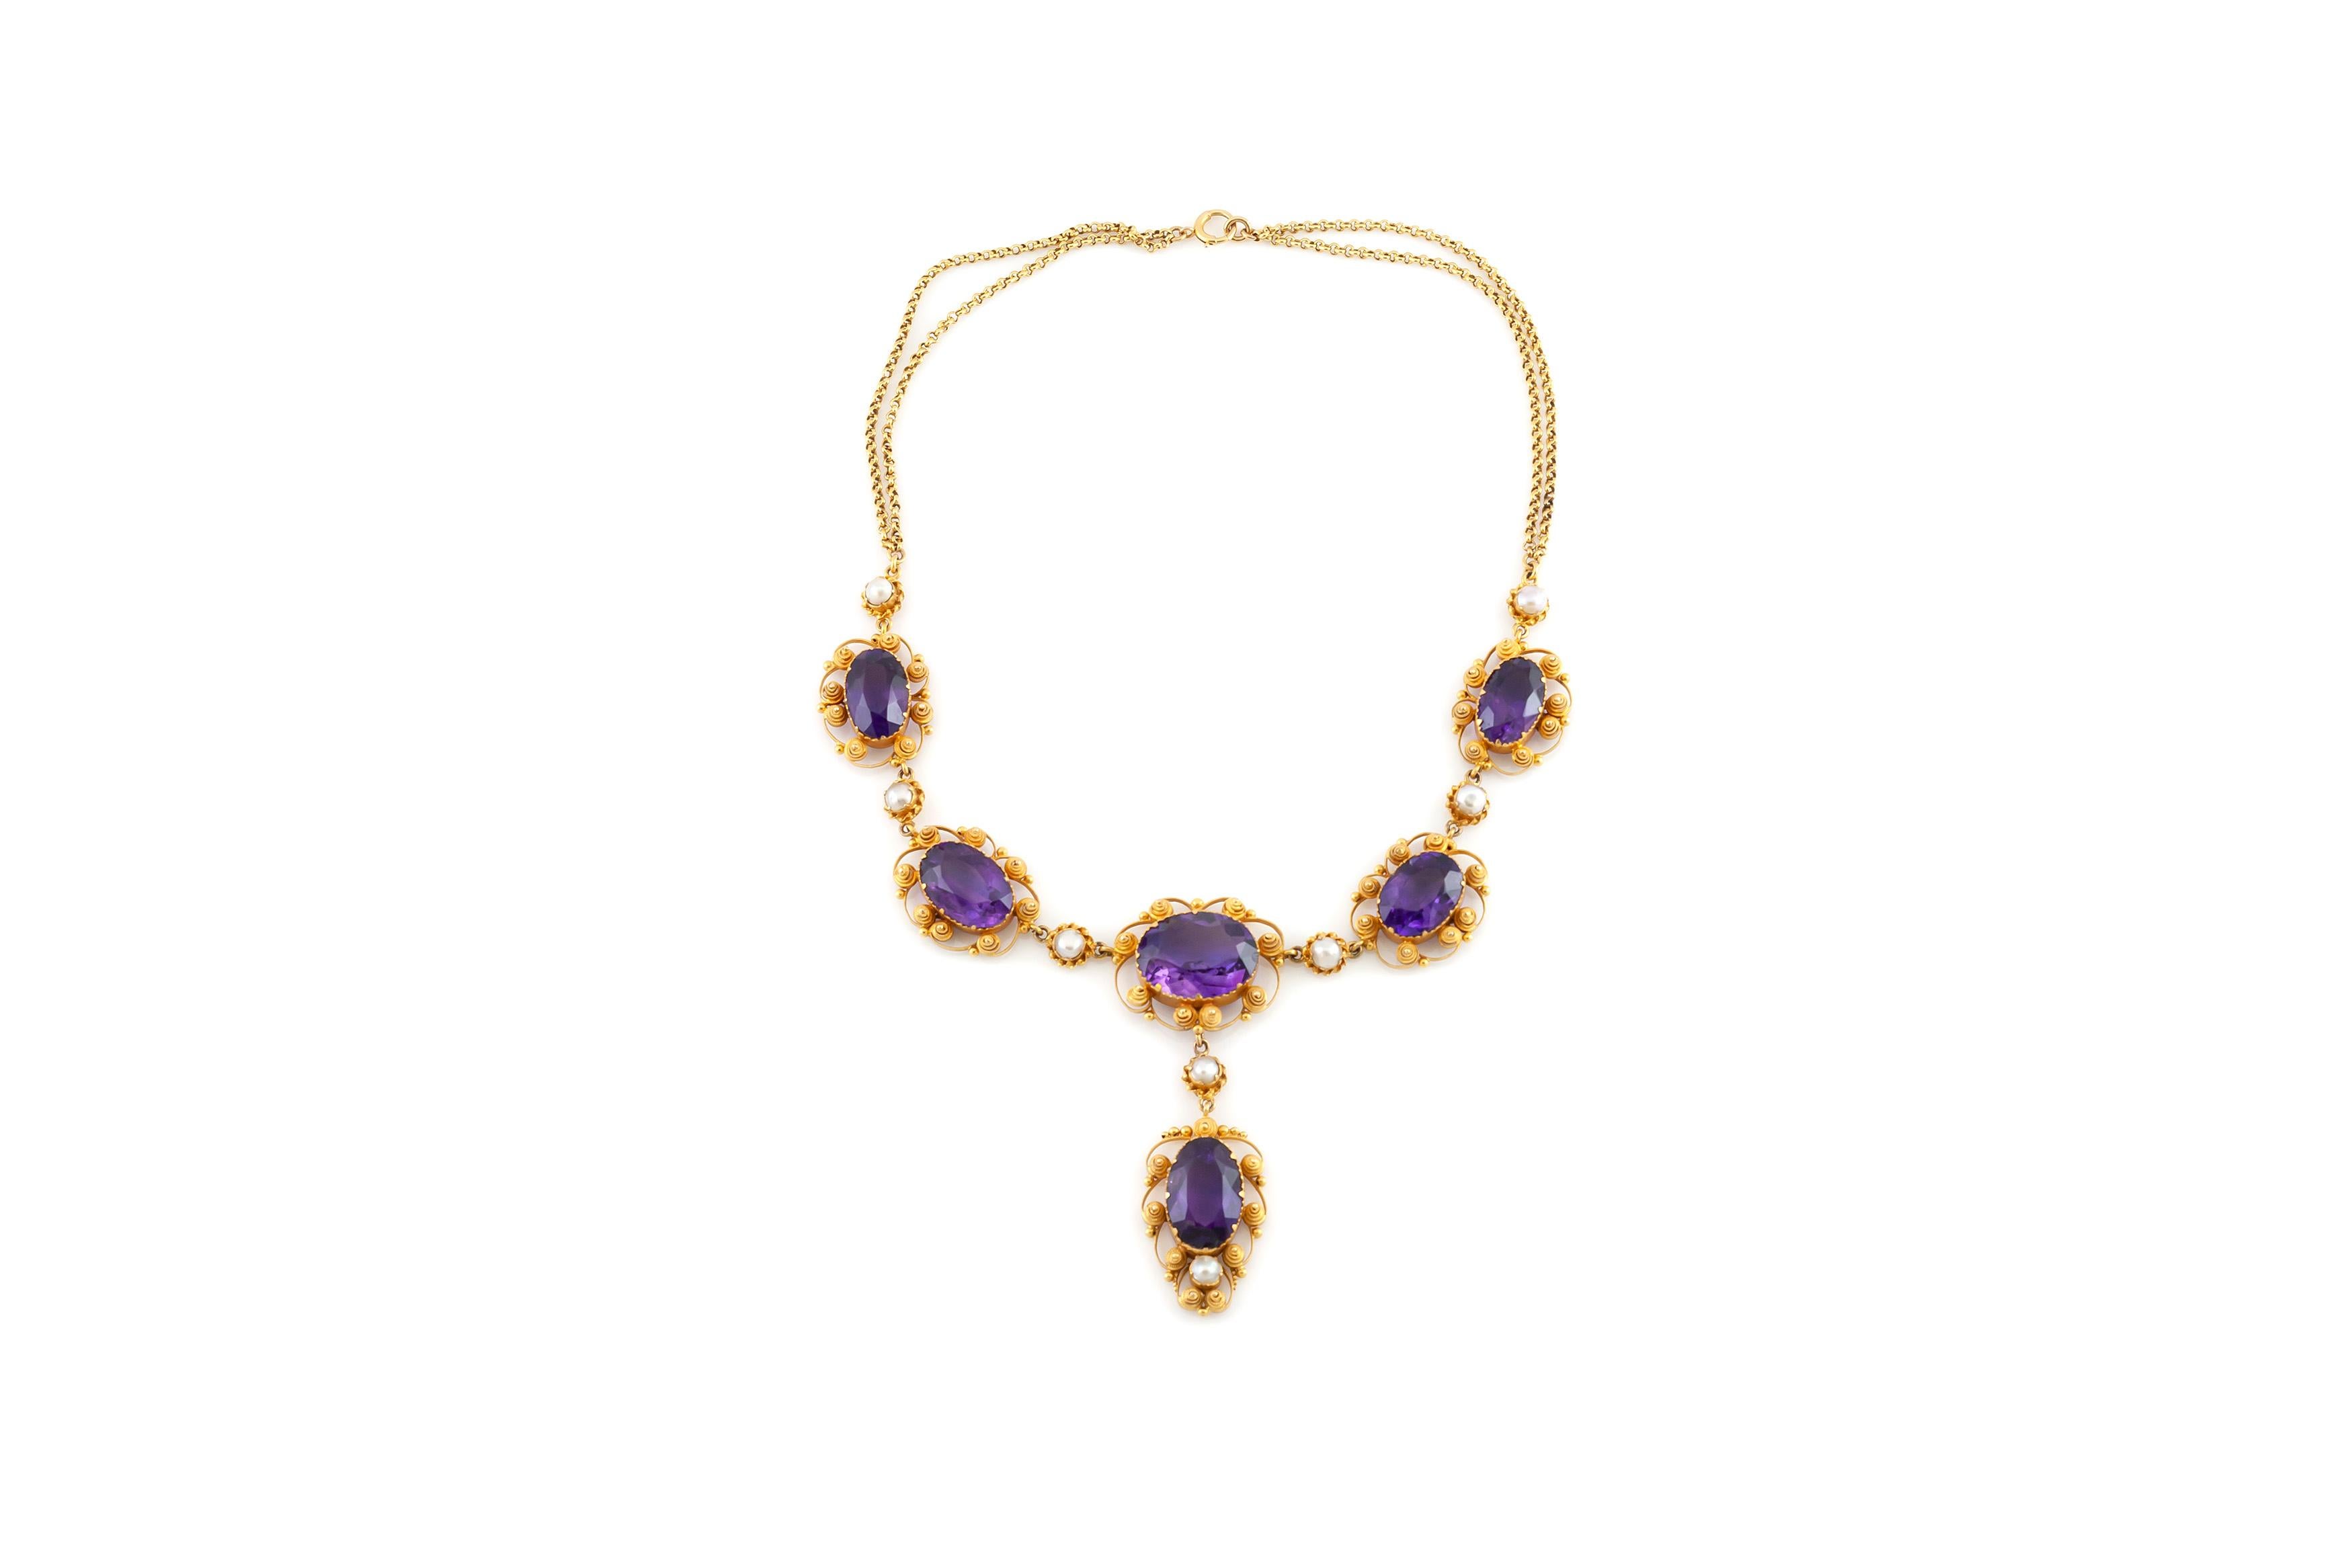 Finely crafted in 9k yellow gold.
The necklace features six Oval shaped Amethysts weighing approximately a total of 57.00 carats, the drop is detachable.
The earrings features two Oval and two Pear Shaped Amethysts weighing approximately a total of